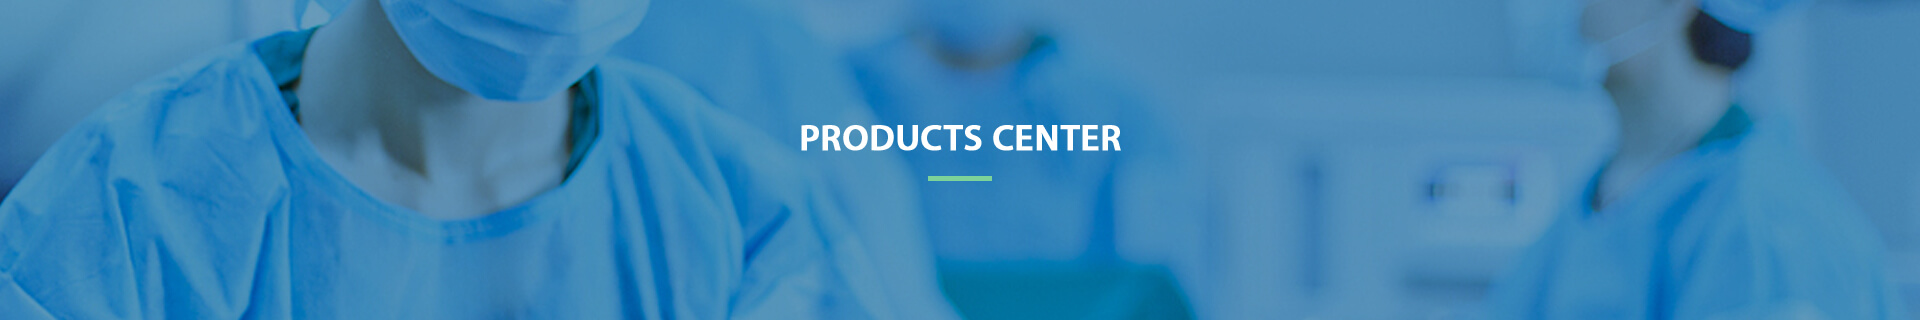  Products CENTER